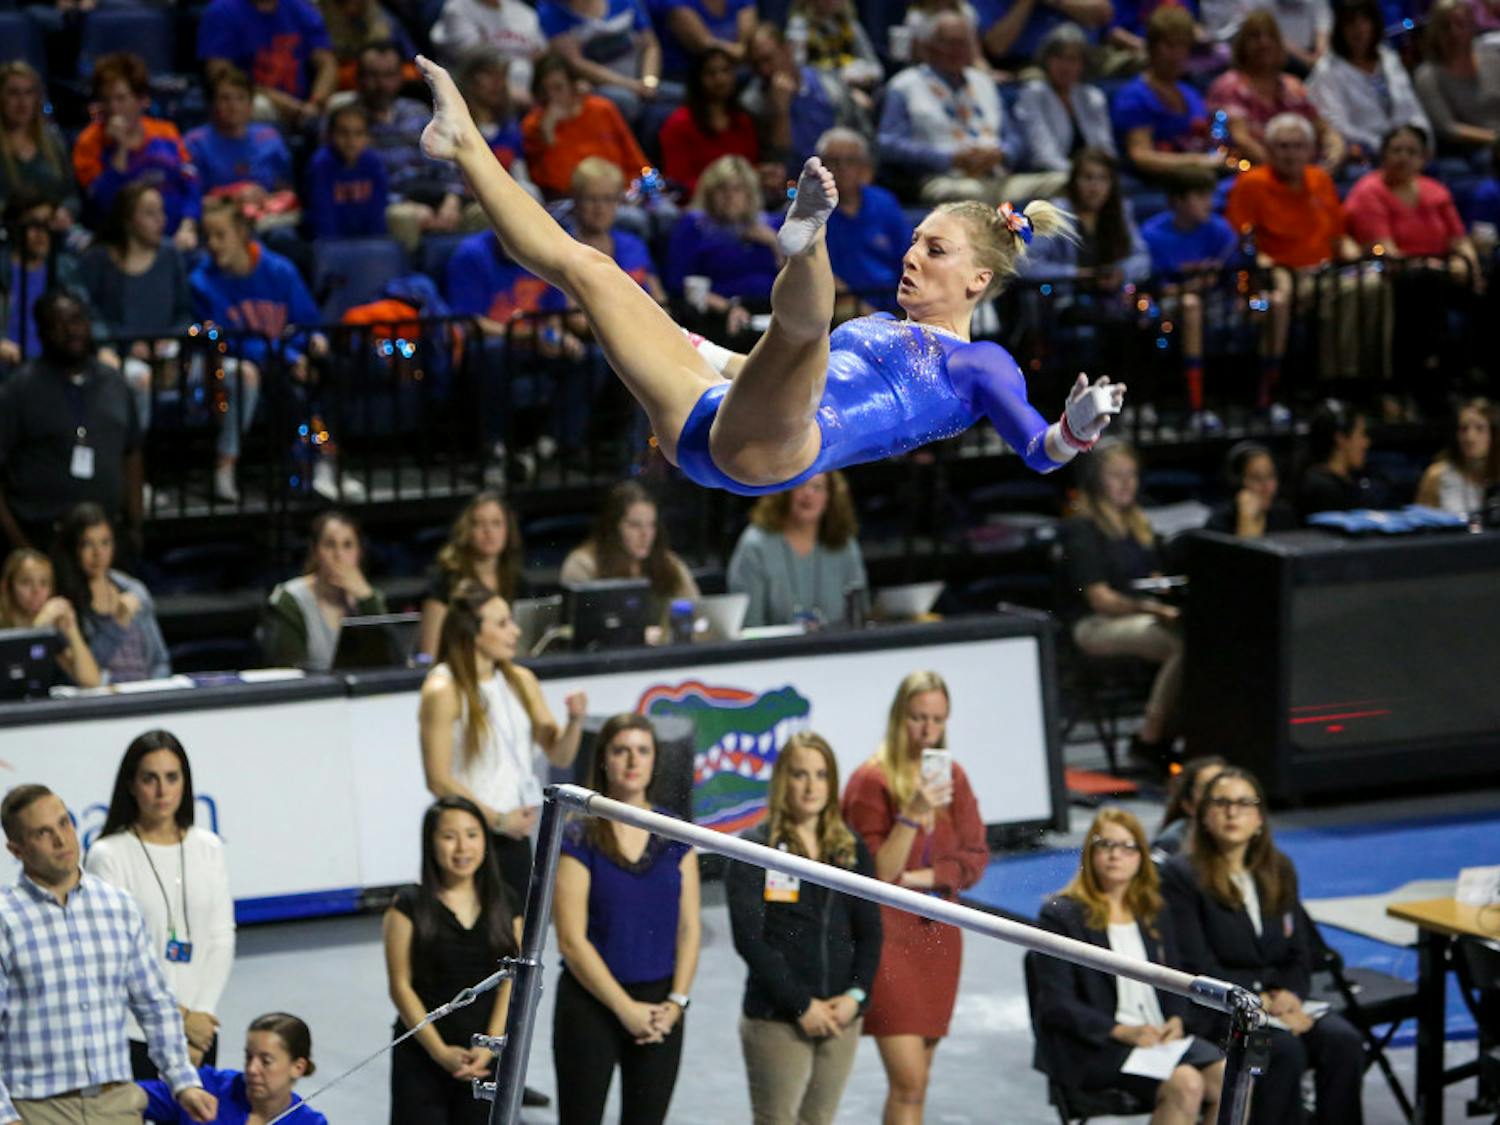 Alex McMurtry recorded a season-low 9.225 on the balance beam Friday night against Auburn, but claimed event titles in both bars and vault, leading Florida to a victory over the Tigers.